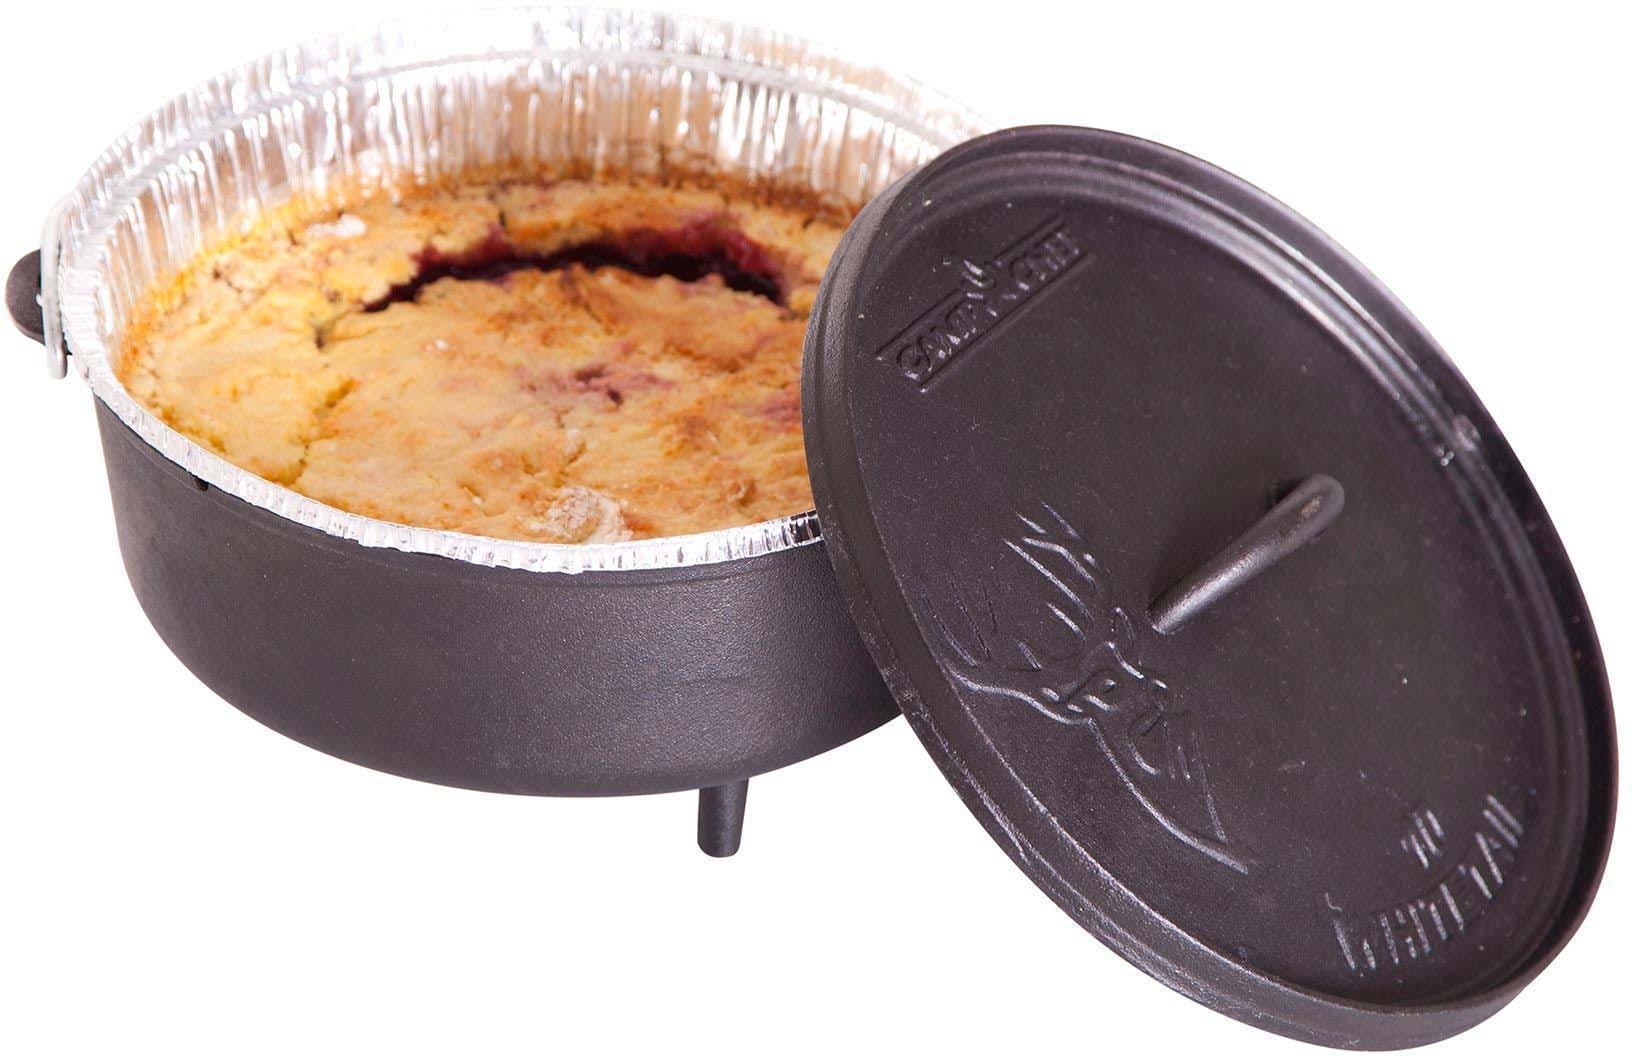 https://op2.0ps.us/original/opplanet-camp-chef-10-in-disposable-dutch-oven-liners-black-silver-aol10-main